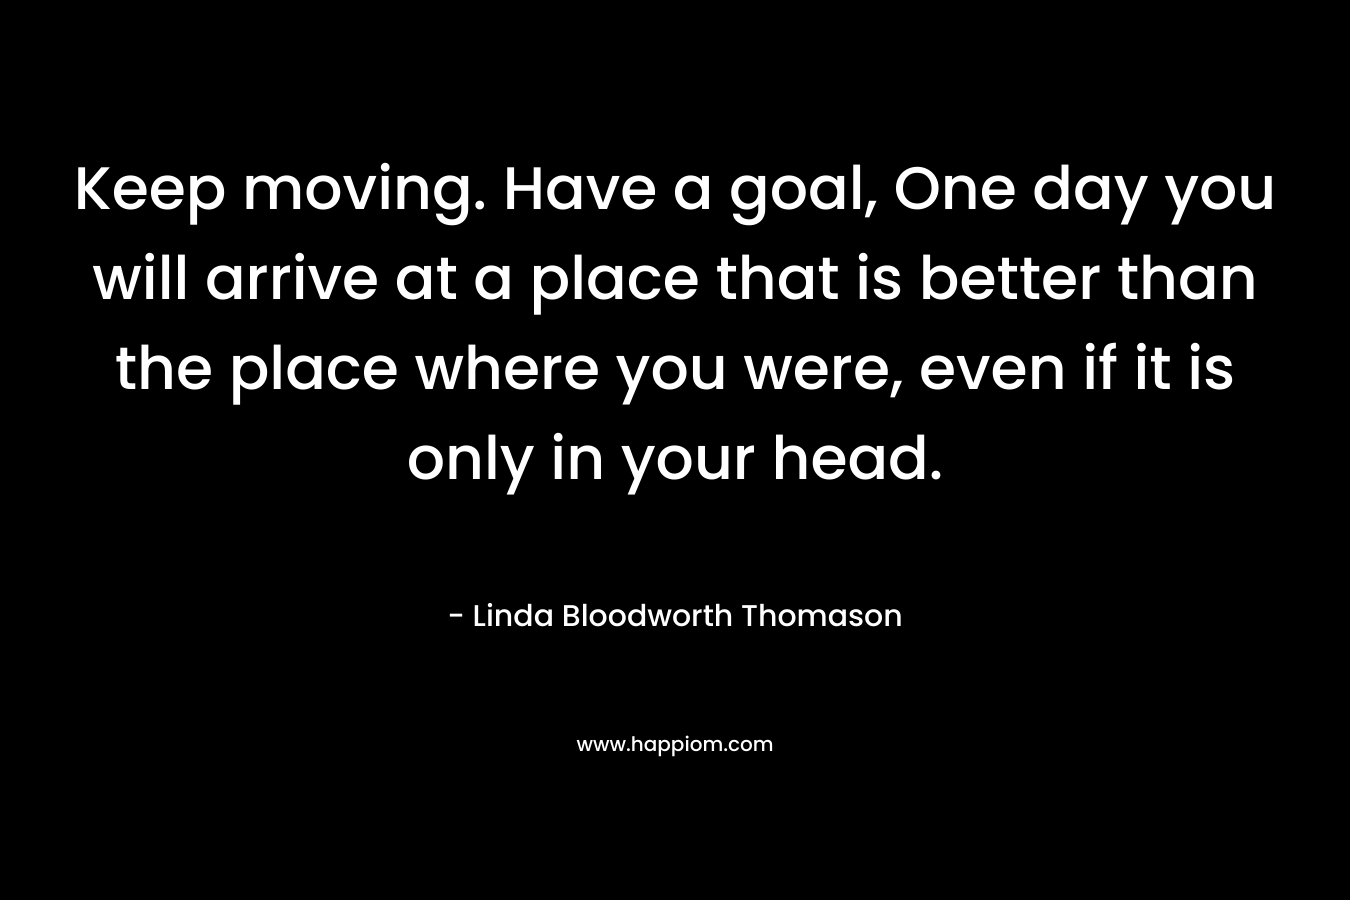 Keep moving. Have a goal, One day you will arrive at a place that is better than the place where you were, even if it is only in your head. – Linda Bloodworth Thomason